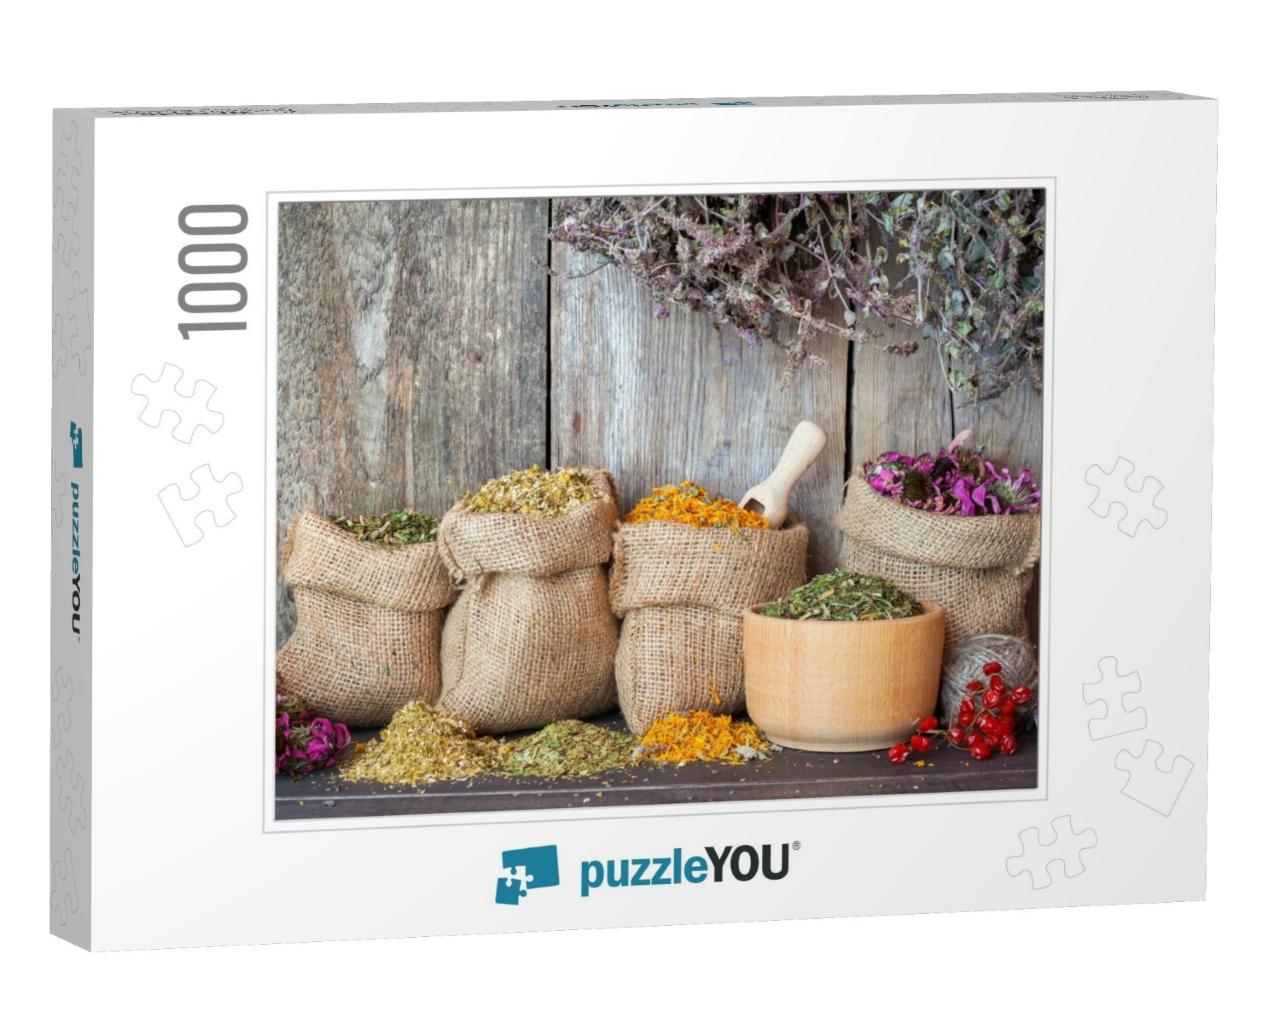 Dried Healing Herbs in Hessian Bags & in Mortar on Wooden... Jigsaw Puzzle with 1000 pieces